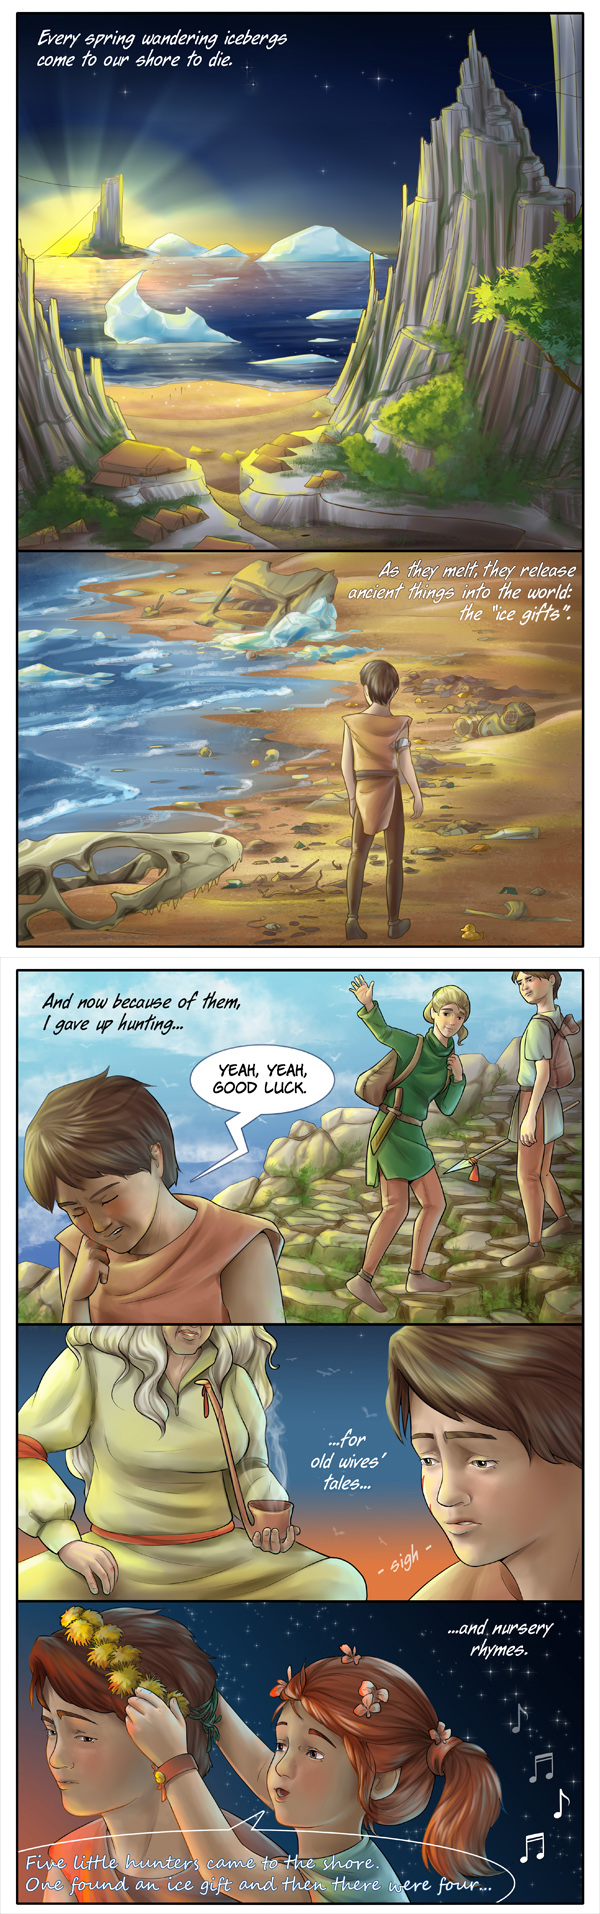 Page 1 - When hunter stops hunting